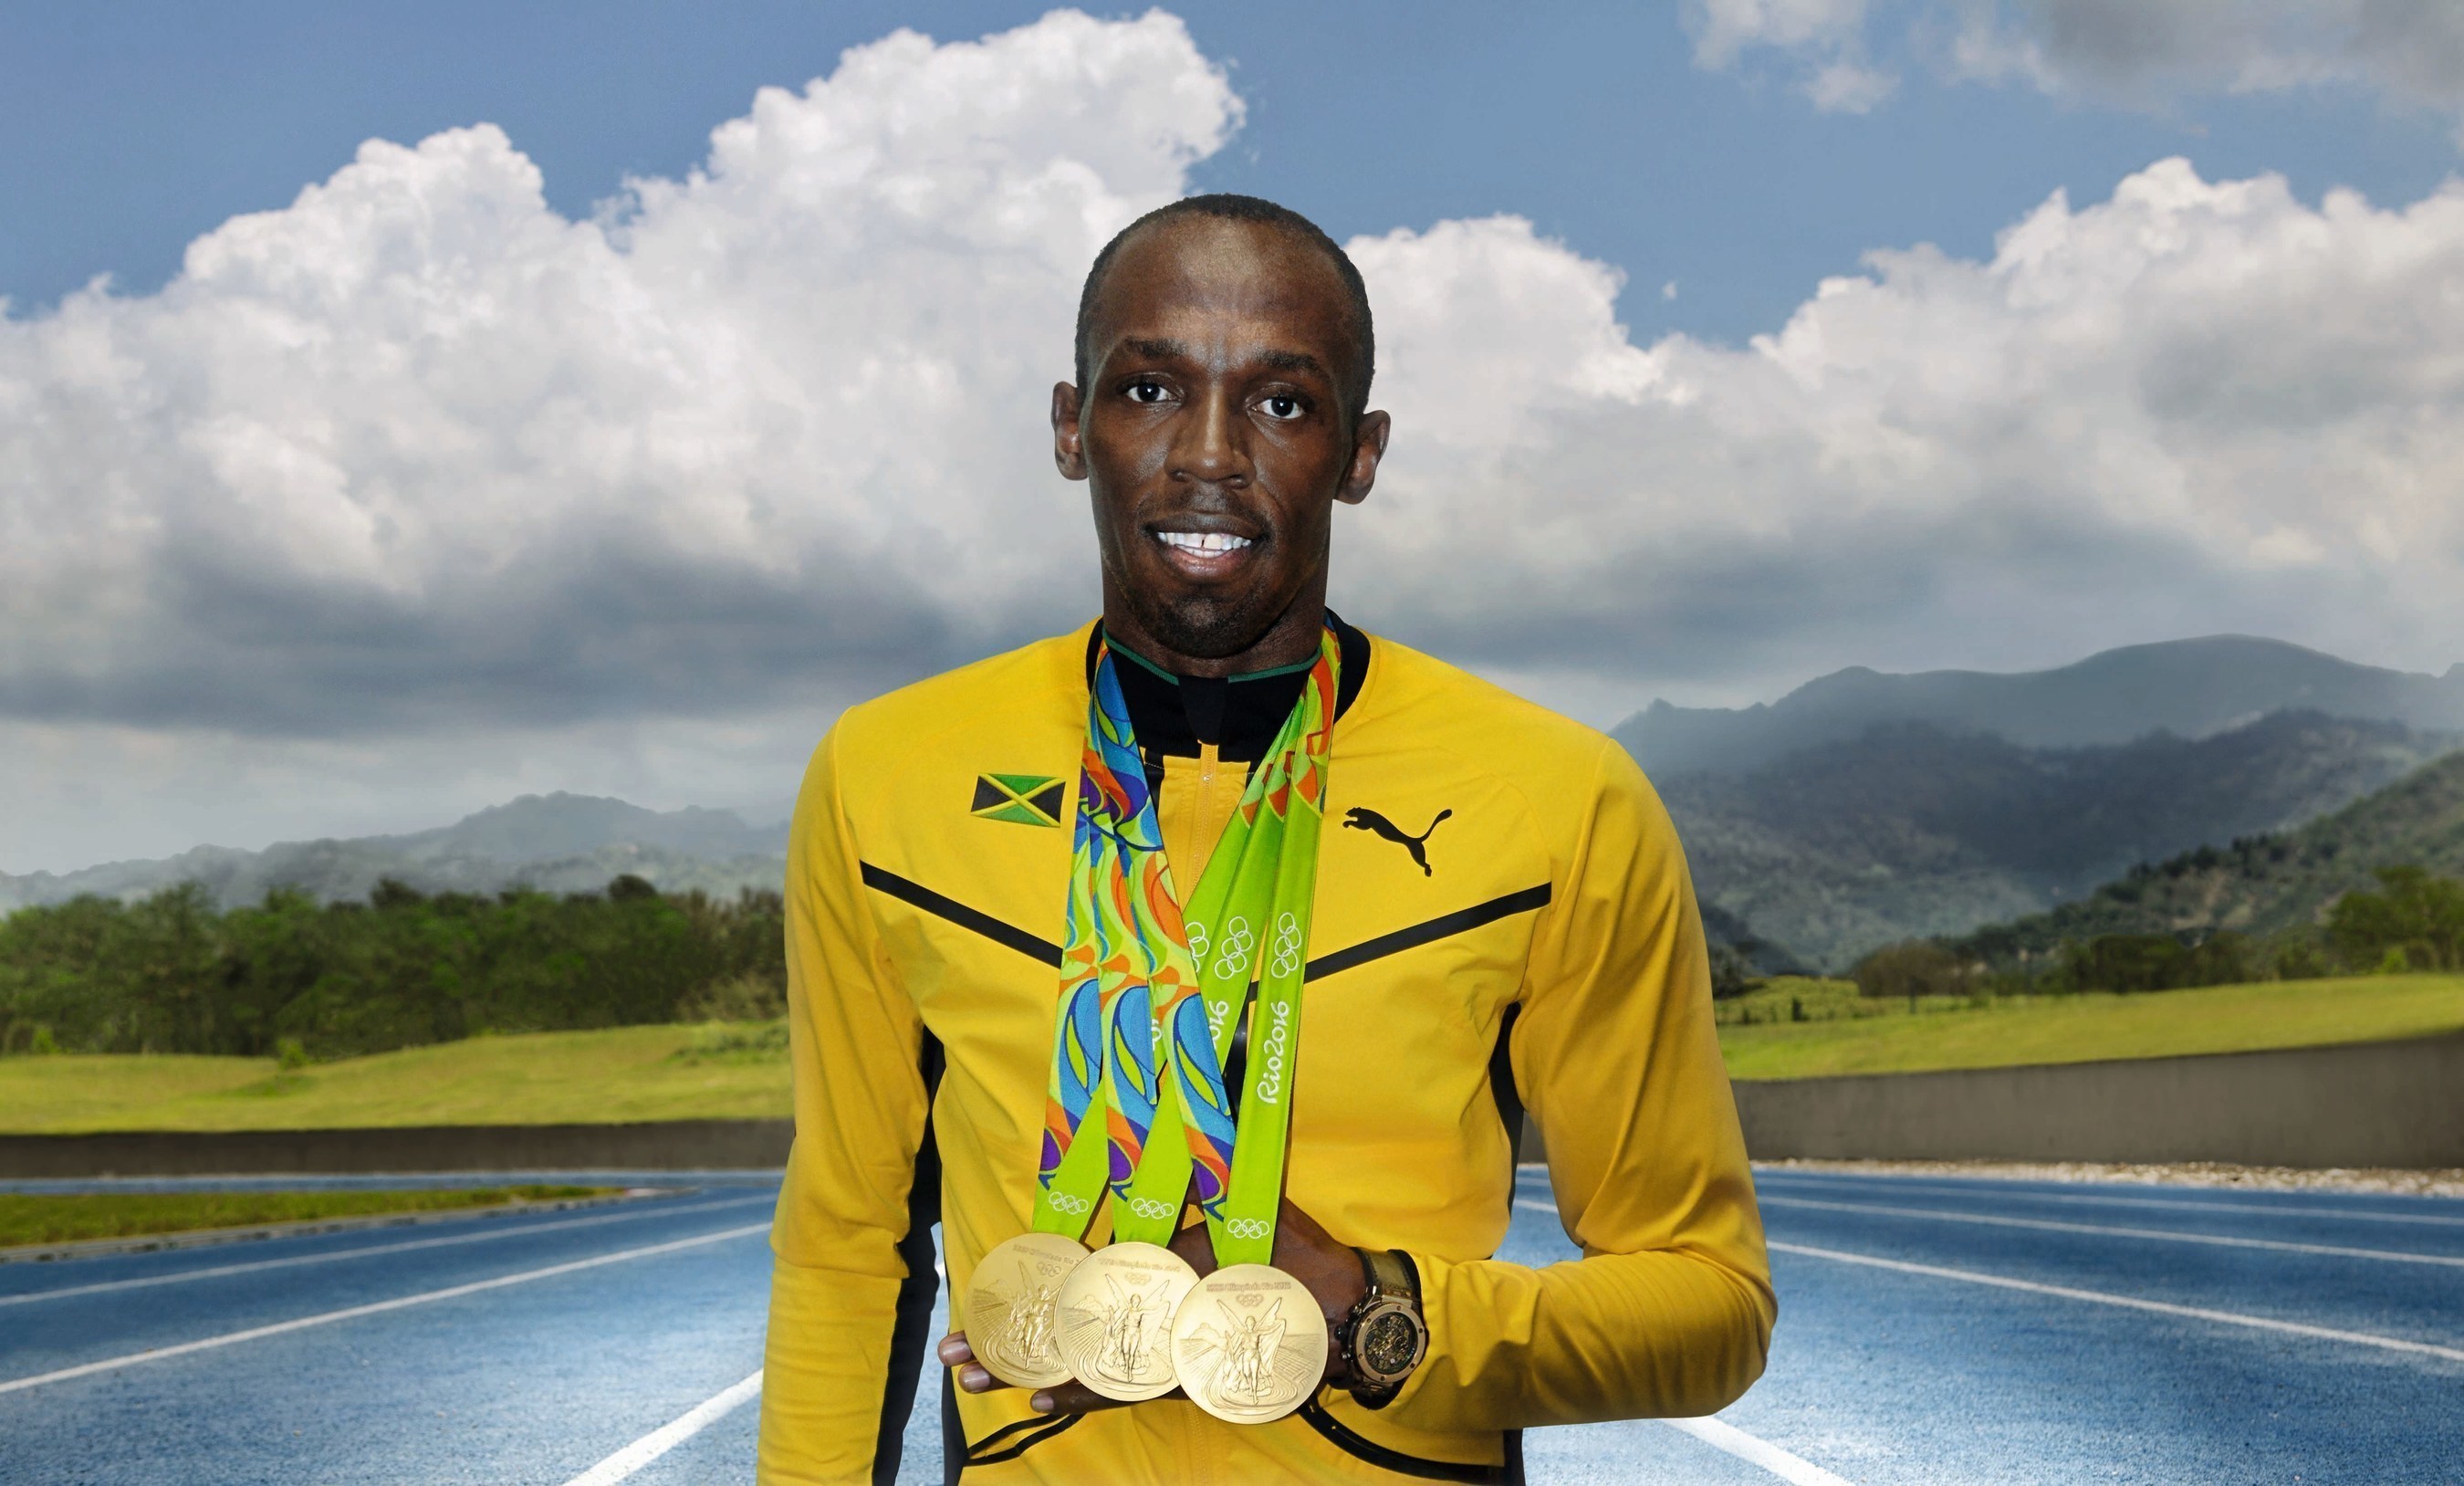 The Legend Usain Bolt with his 3 Gold Olympic Medals.